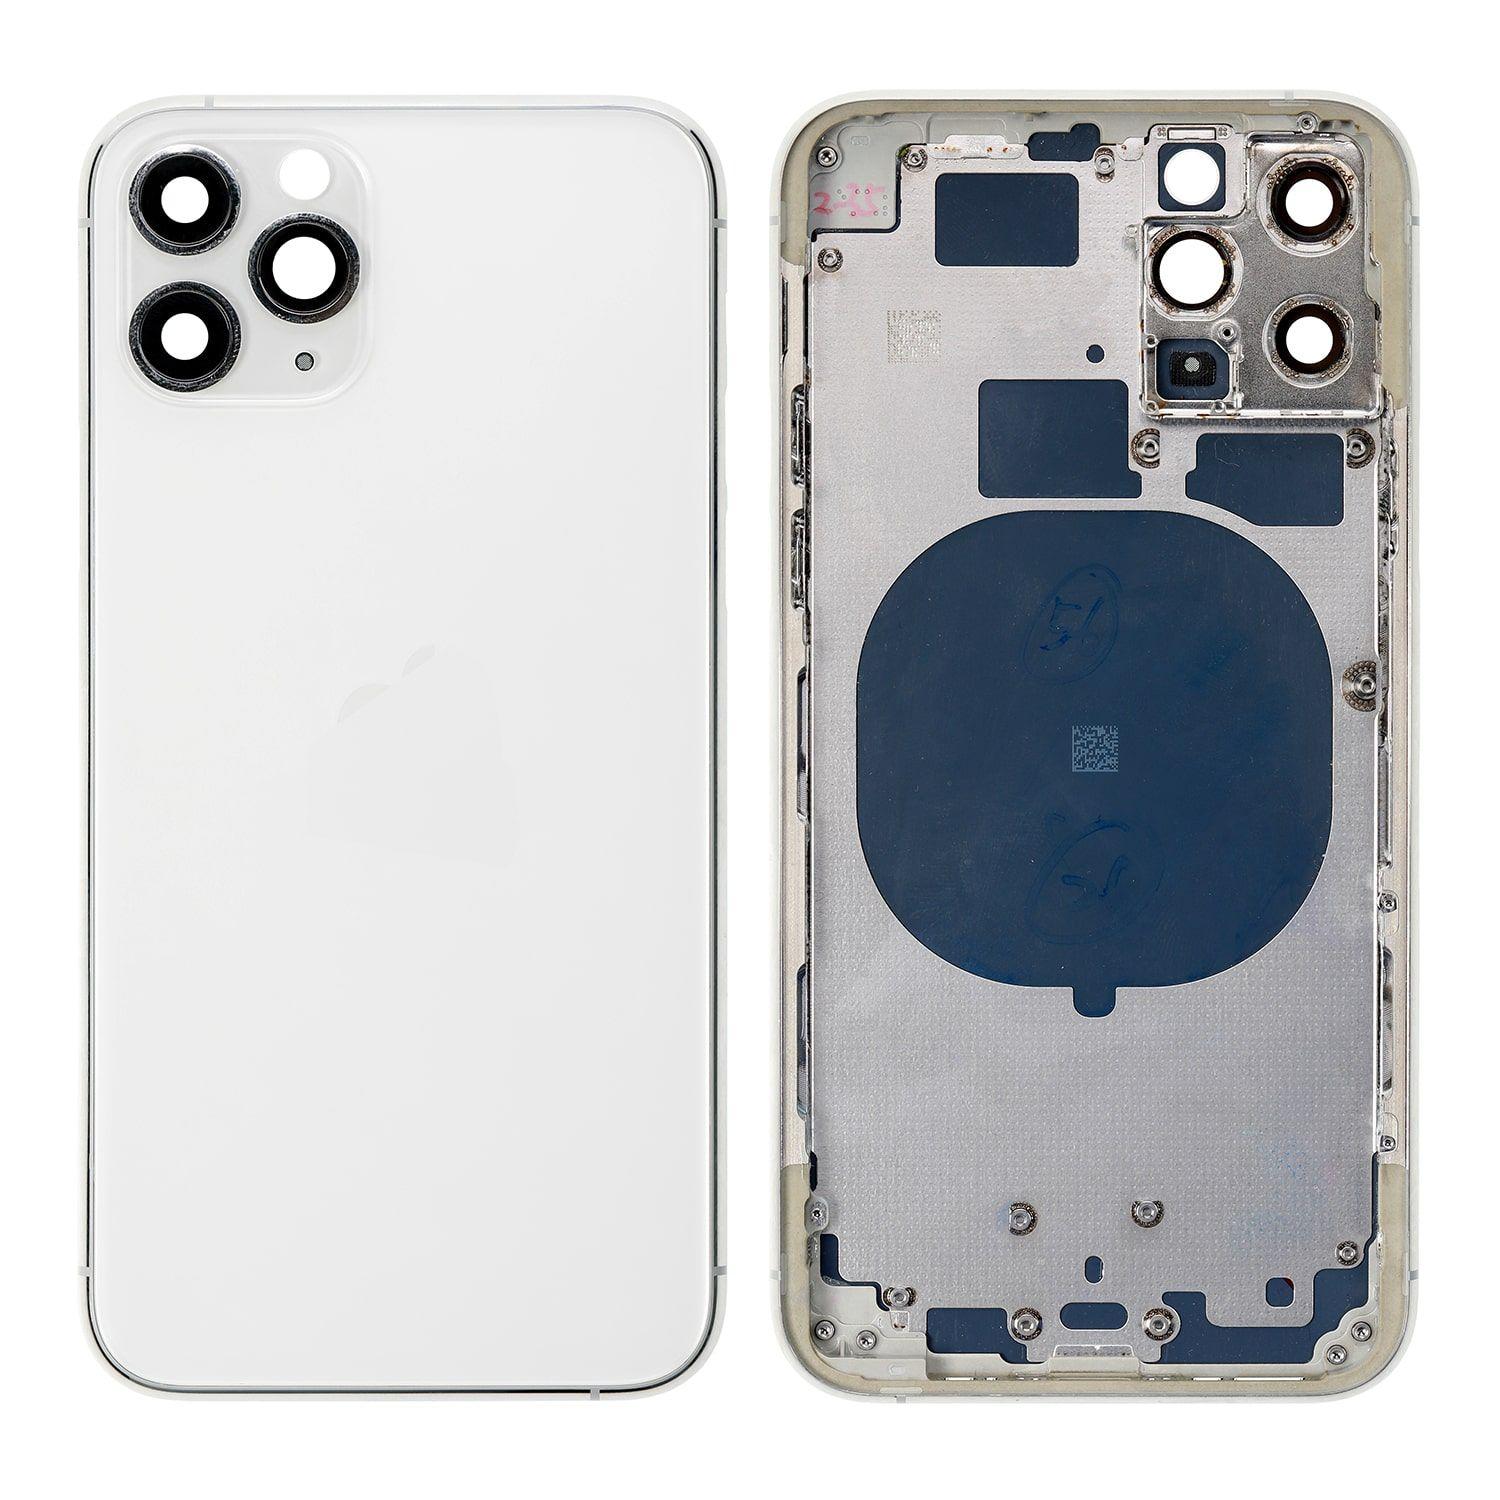 Body for iPhone 11 Pro + back cover white